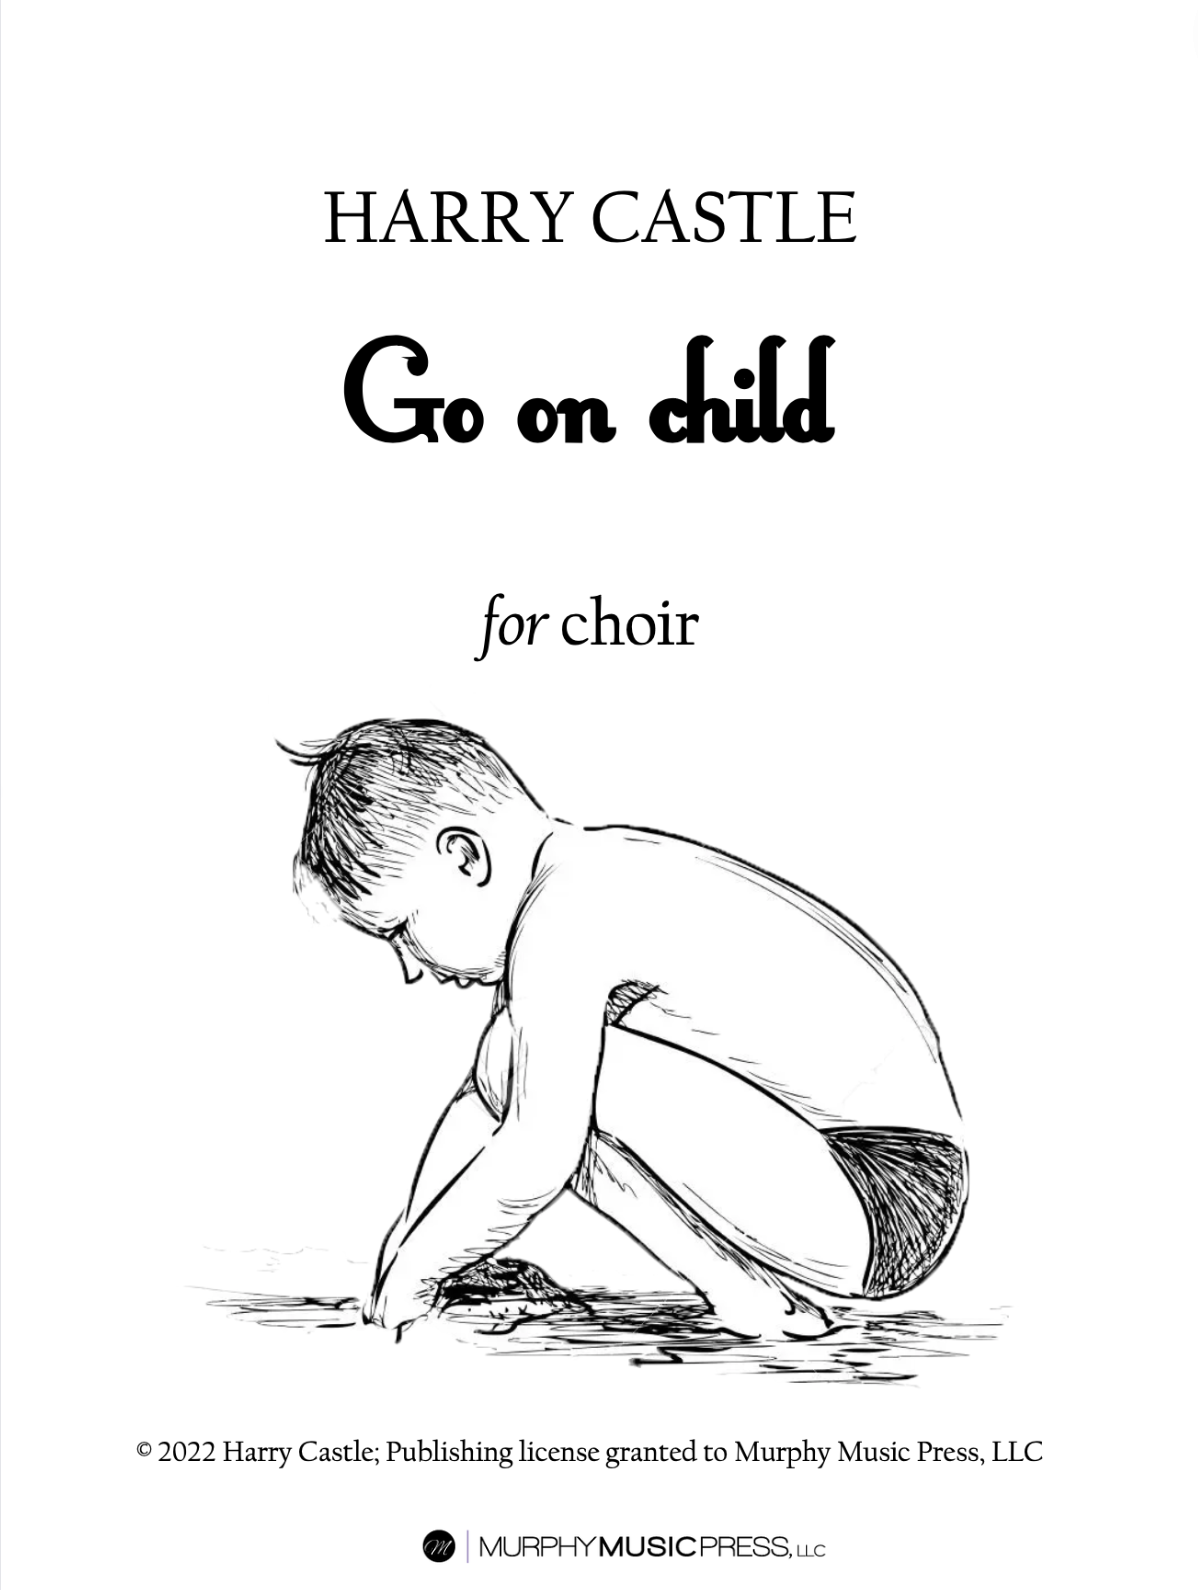 Go on child by Harry Castle